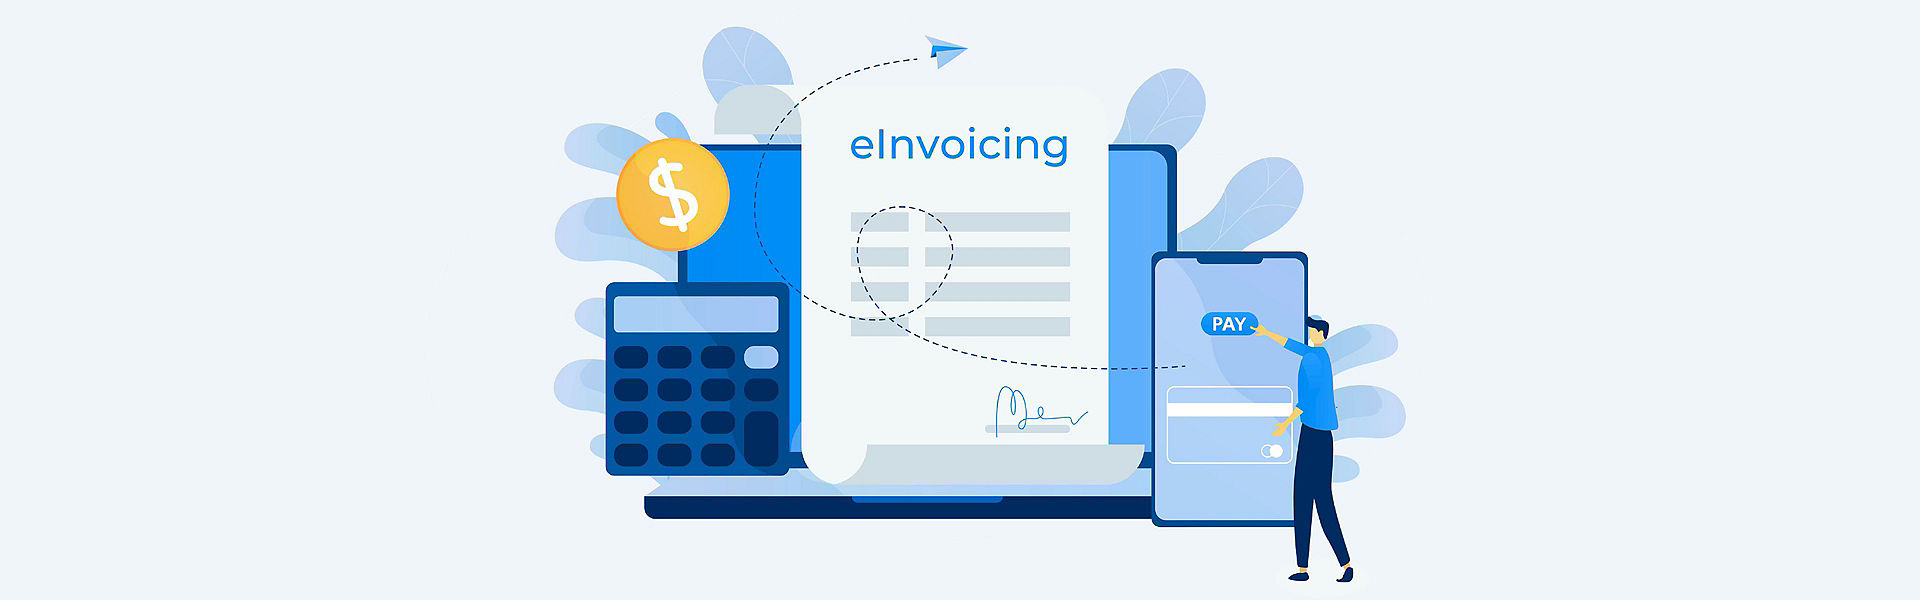 Illustration of eInvoicing with calculator, computer, invoice, dollar coin, phone and person